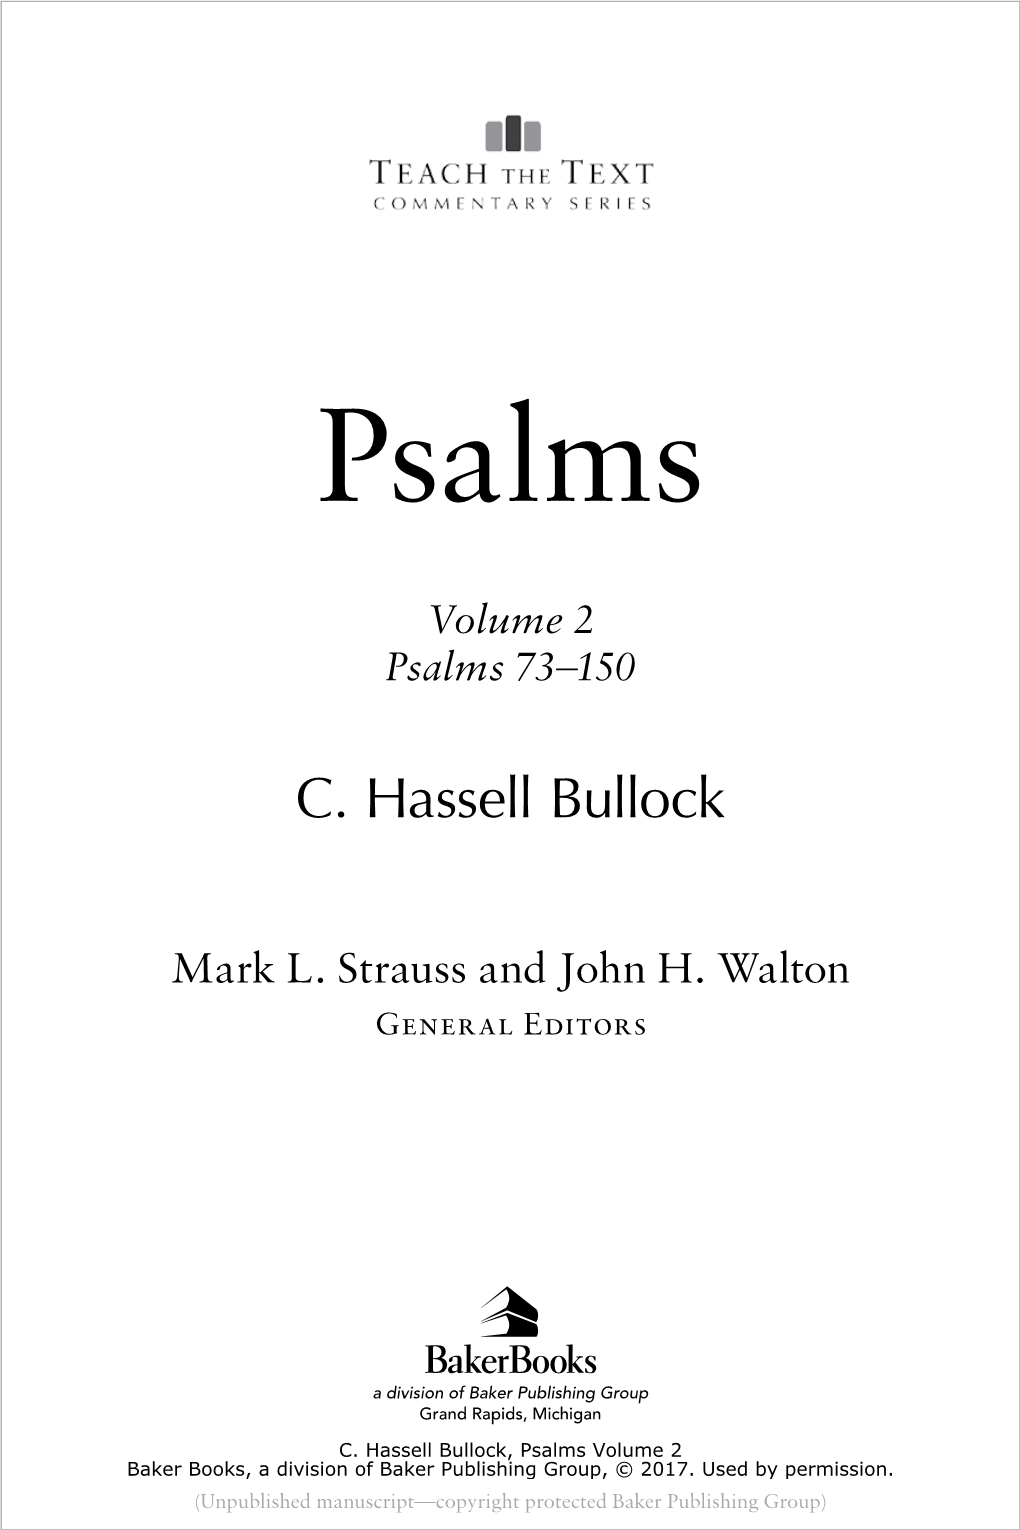 Psalms Can Be Classified Under More Than One Category, with the Lists Varying from One Scholar to Another, the Following Gives a Typical List by Book: Book 1: Pss